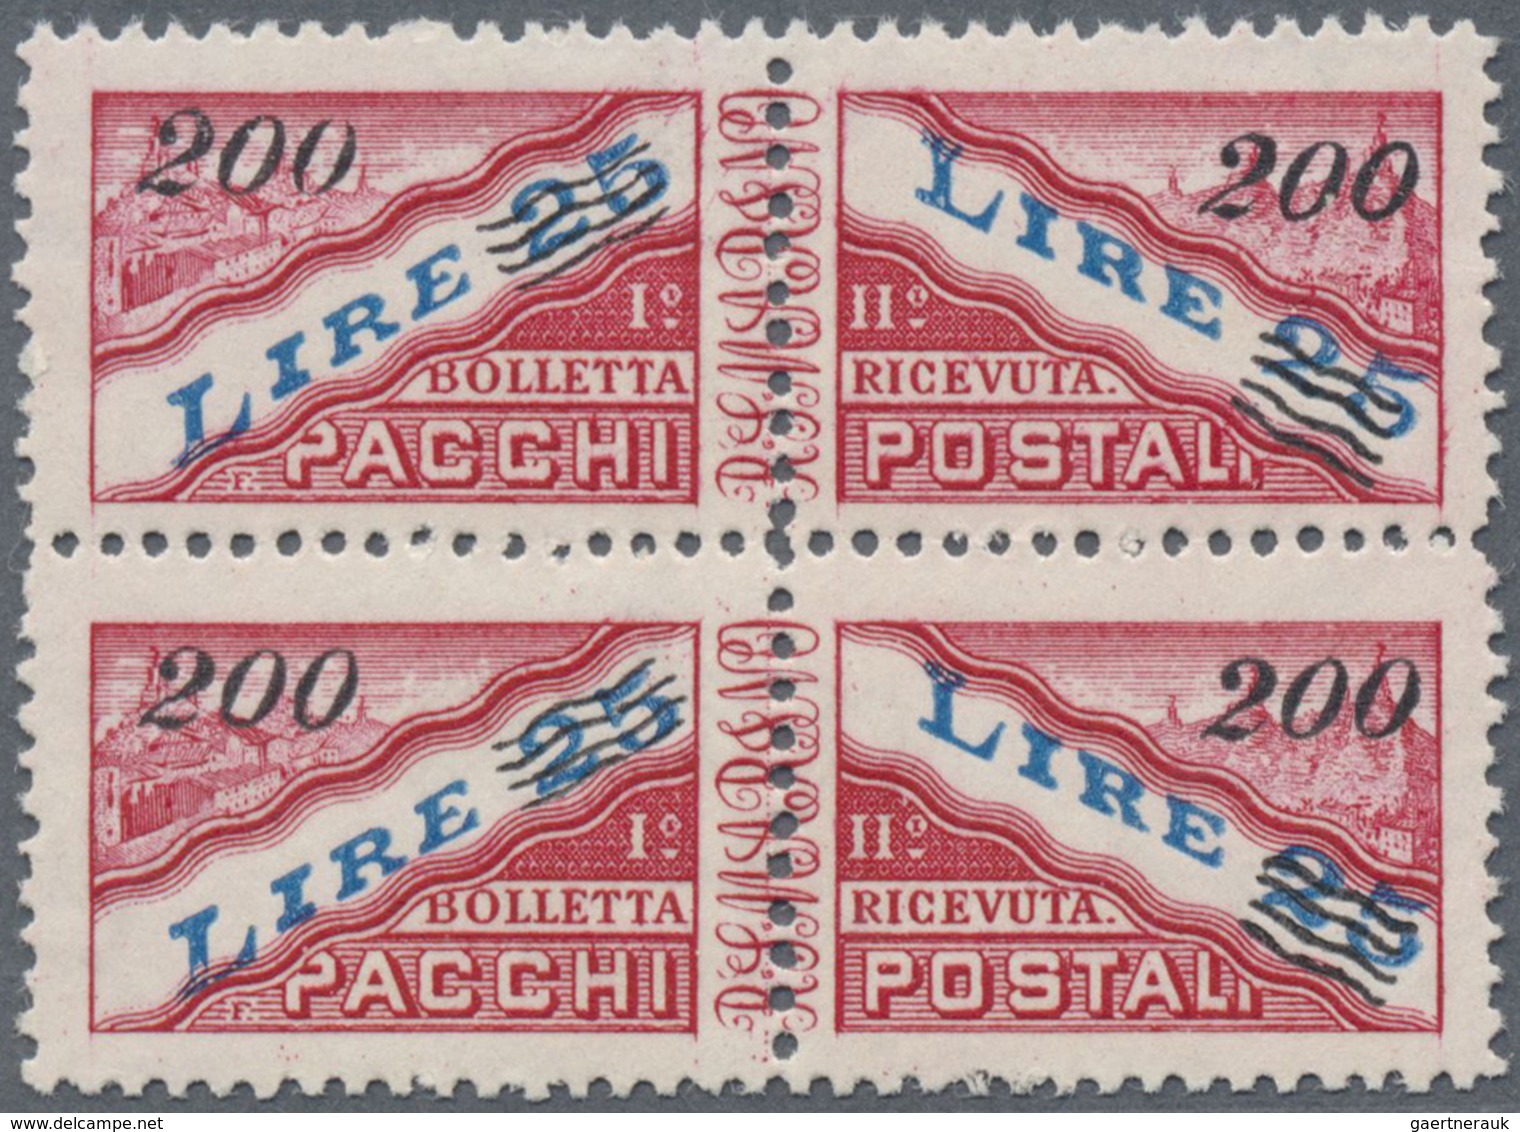 **/ San Marino - Paketmarken: 1950, Package Stamps With New Value Overprint 200 L On 25 L. In The Vertic - Colis Postaux